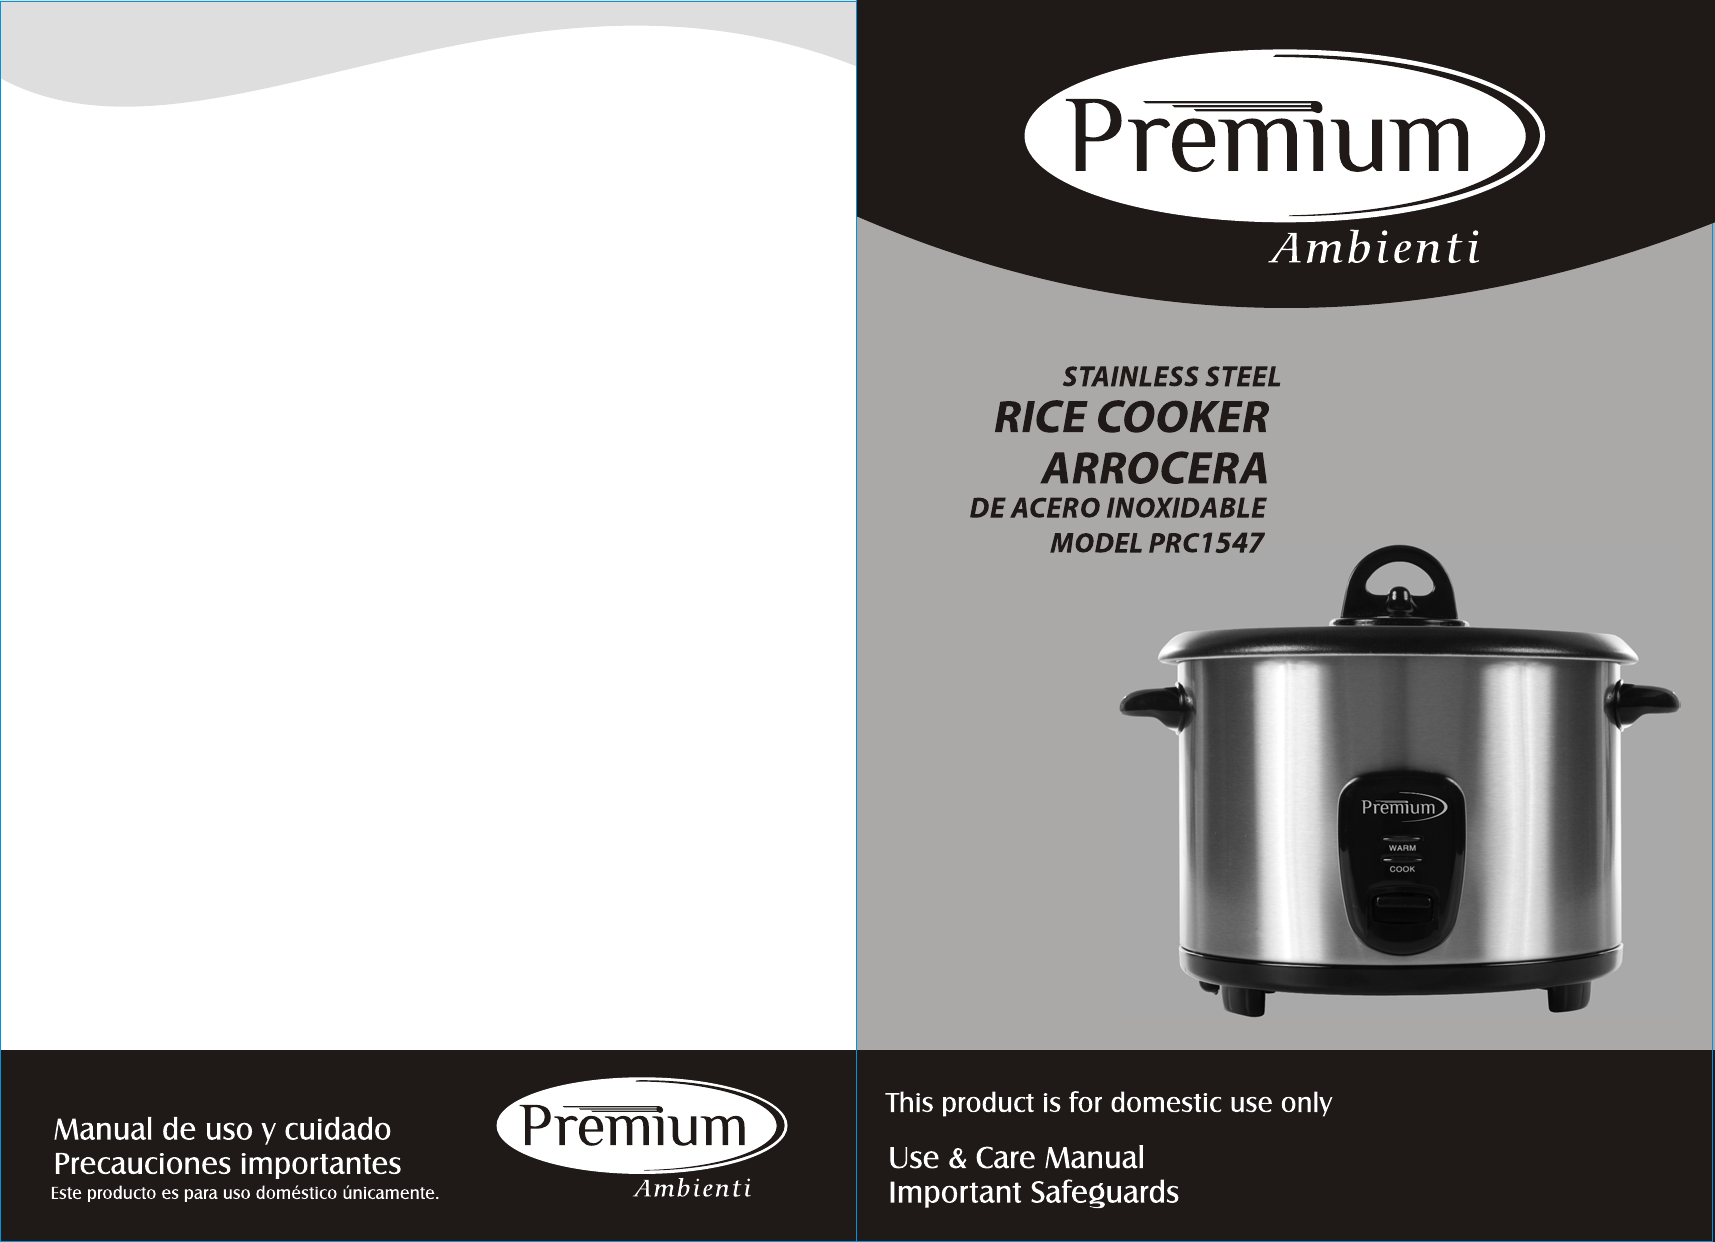 Black and Decker Rice Cooker Instructions - RC3406 